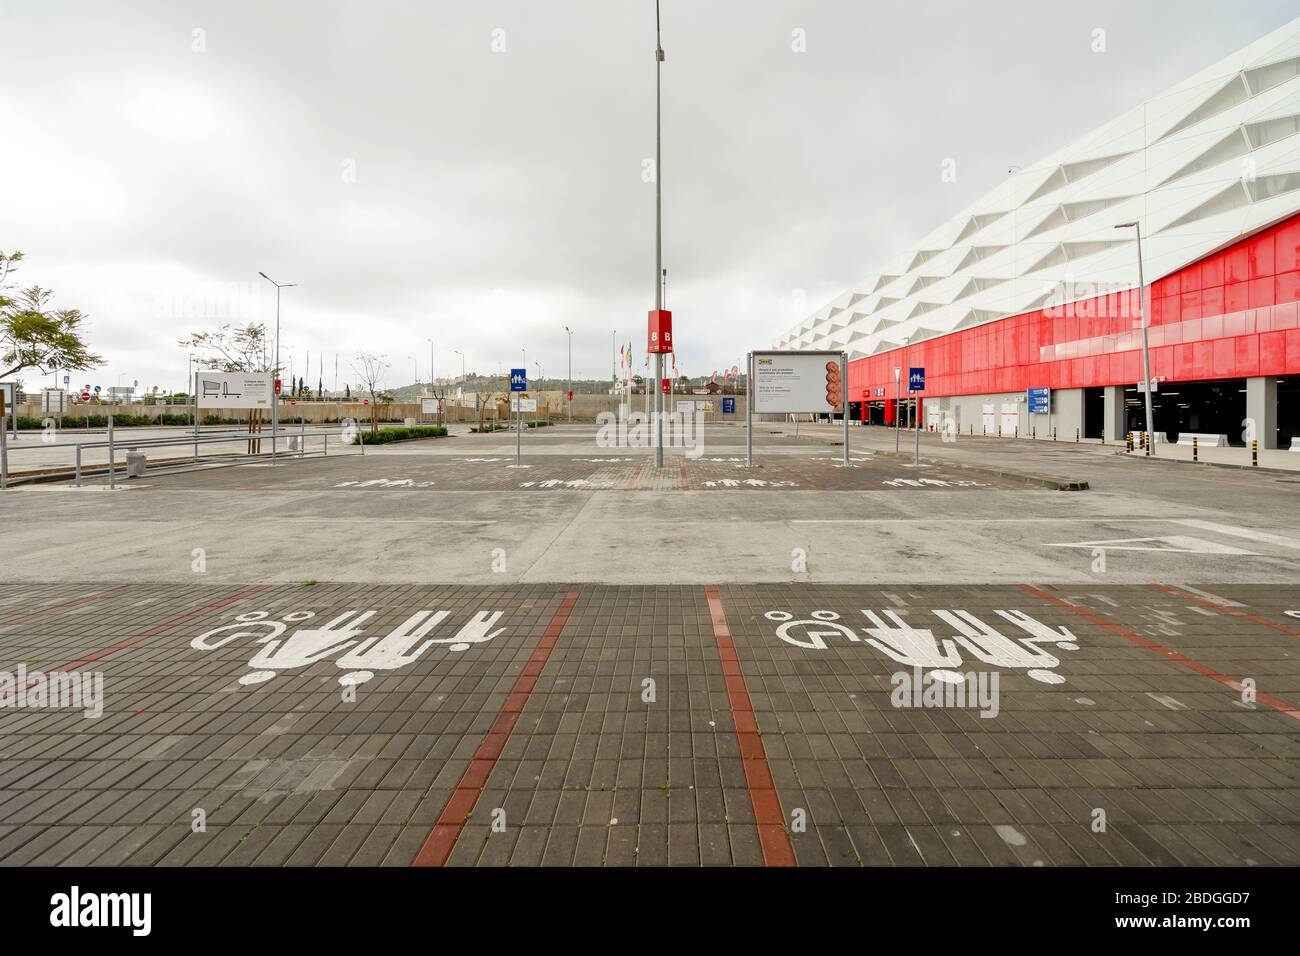 Faro, Portugal - April 7, 2020: Empty parking lot in front of the biggest  shopping mall in Algarve - MAR Shopping Mall, Designer Outlet and Ikea -  due Stock Photo - Alamy